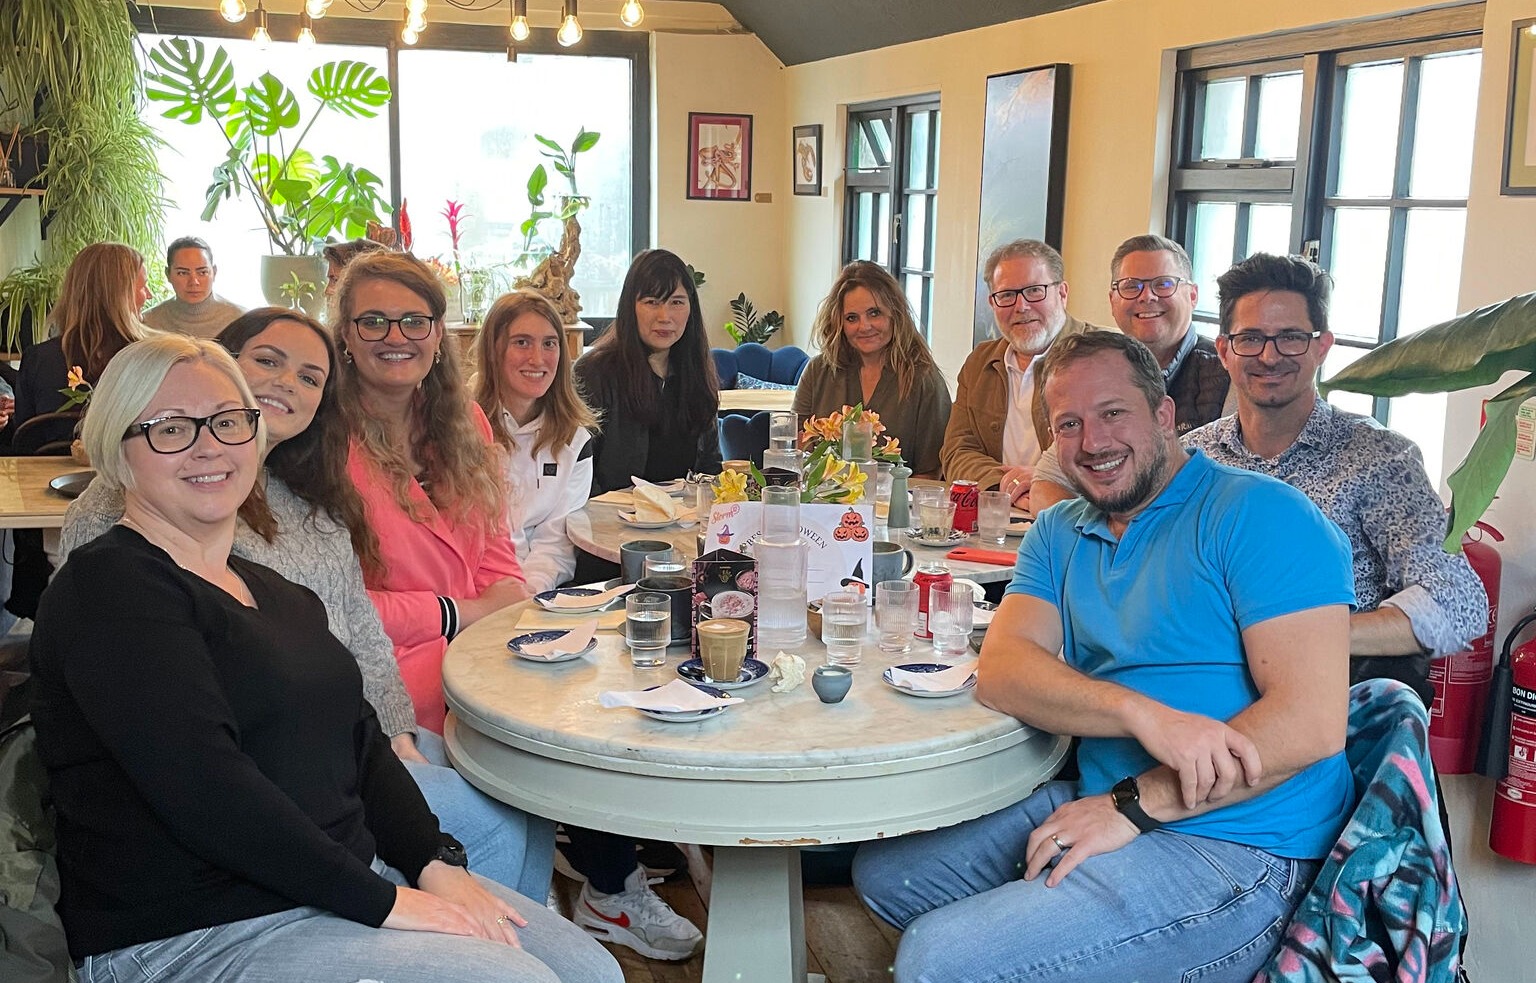 Storm12 team out for lunch